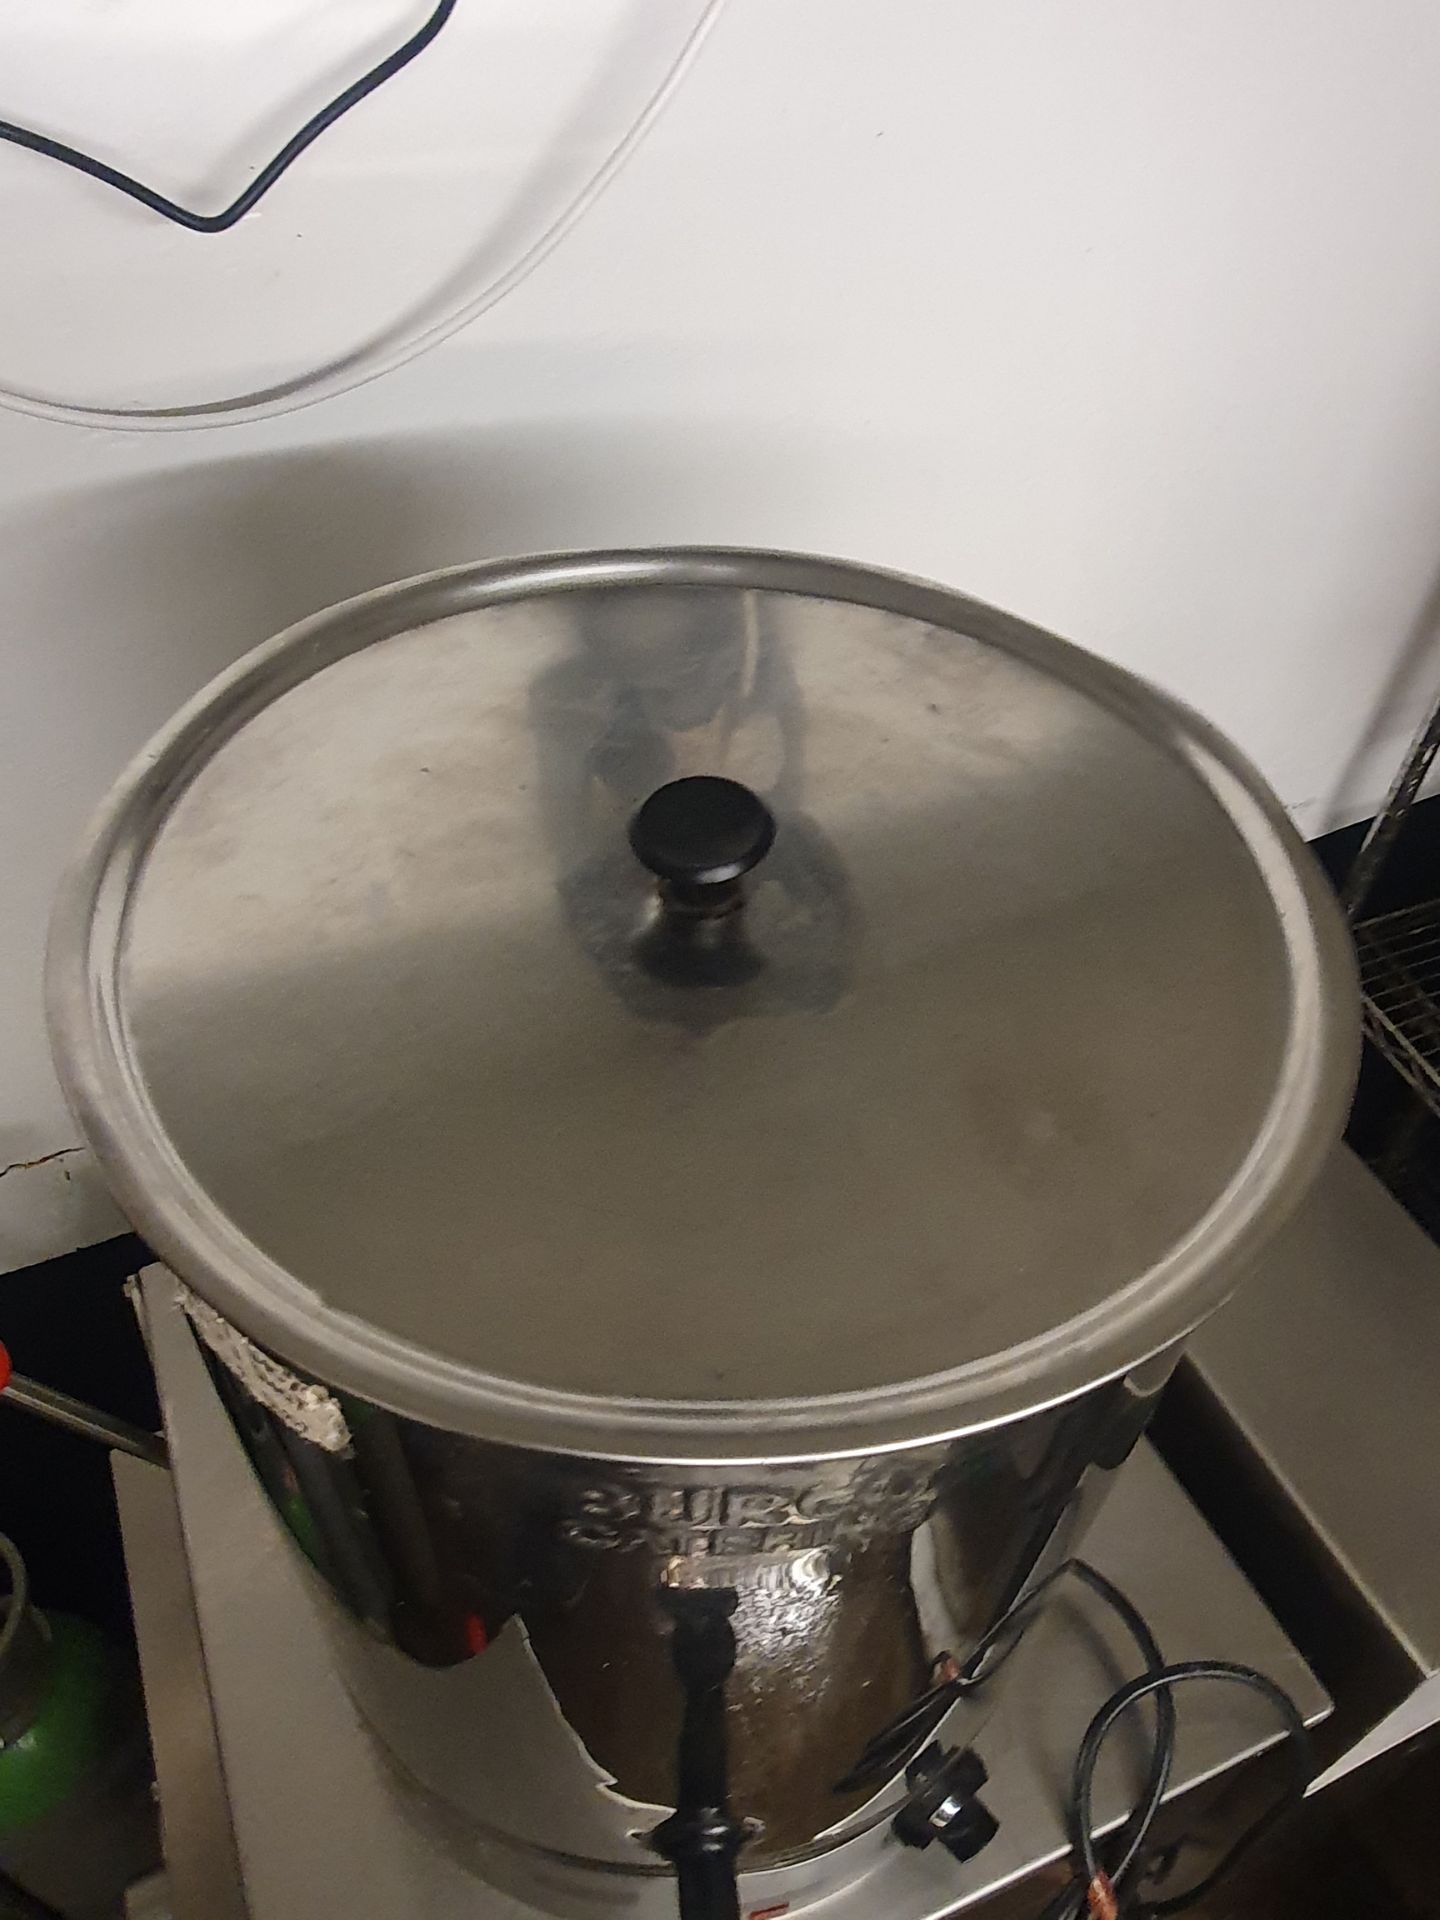 Burco hot water urn with tap - Image 4 of 5